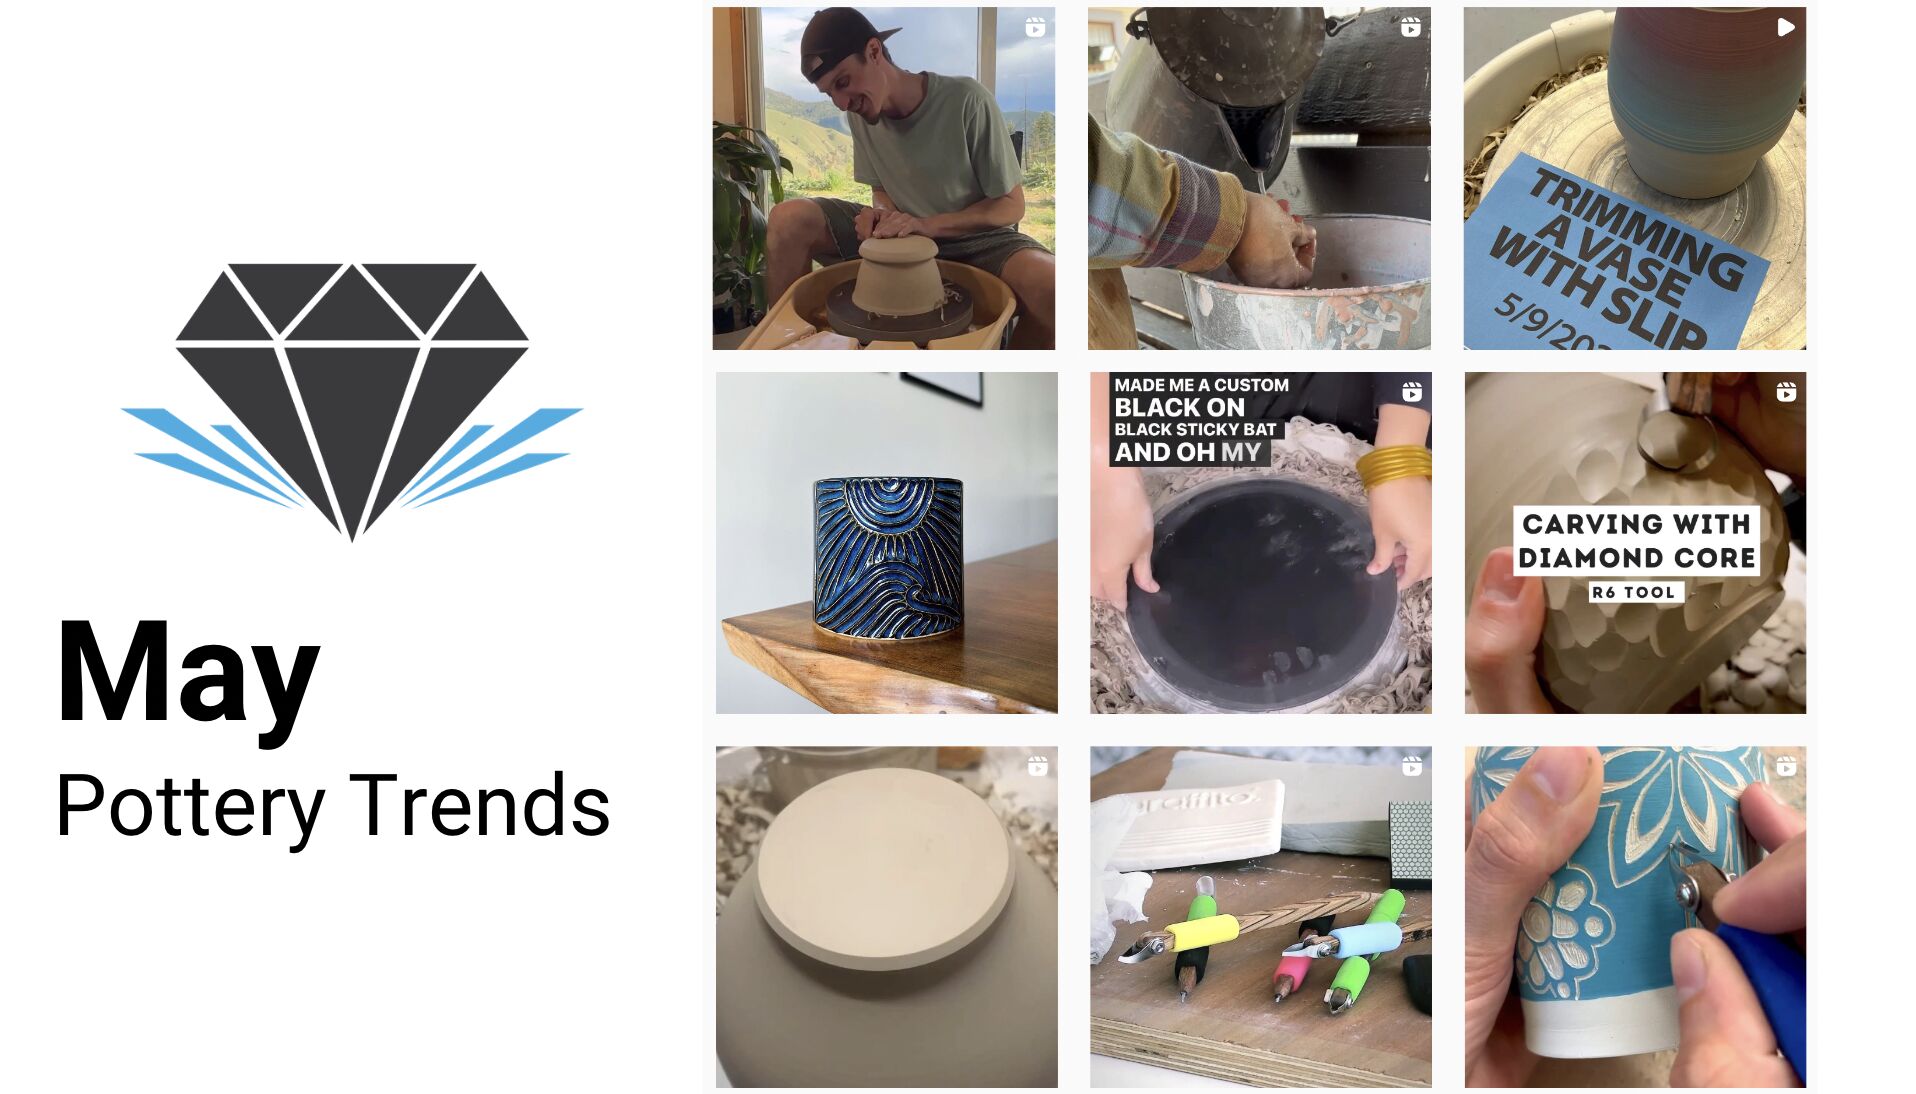 Carving On Pottery - New Diamond Core Tools 